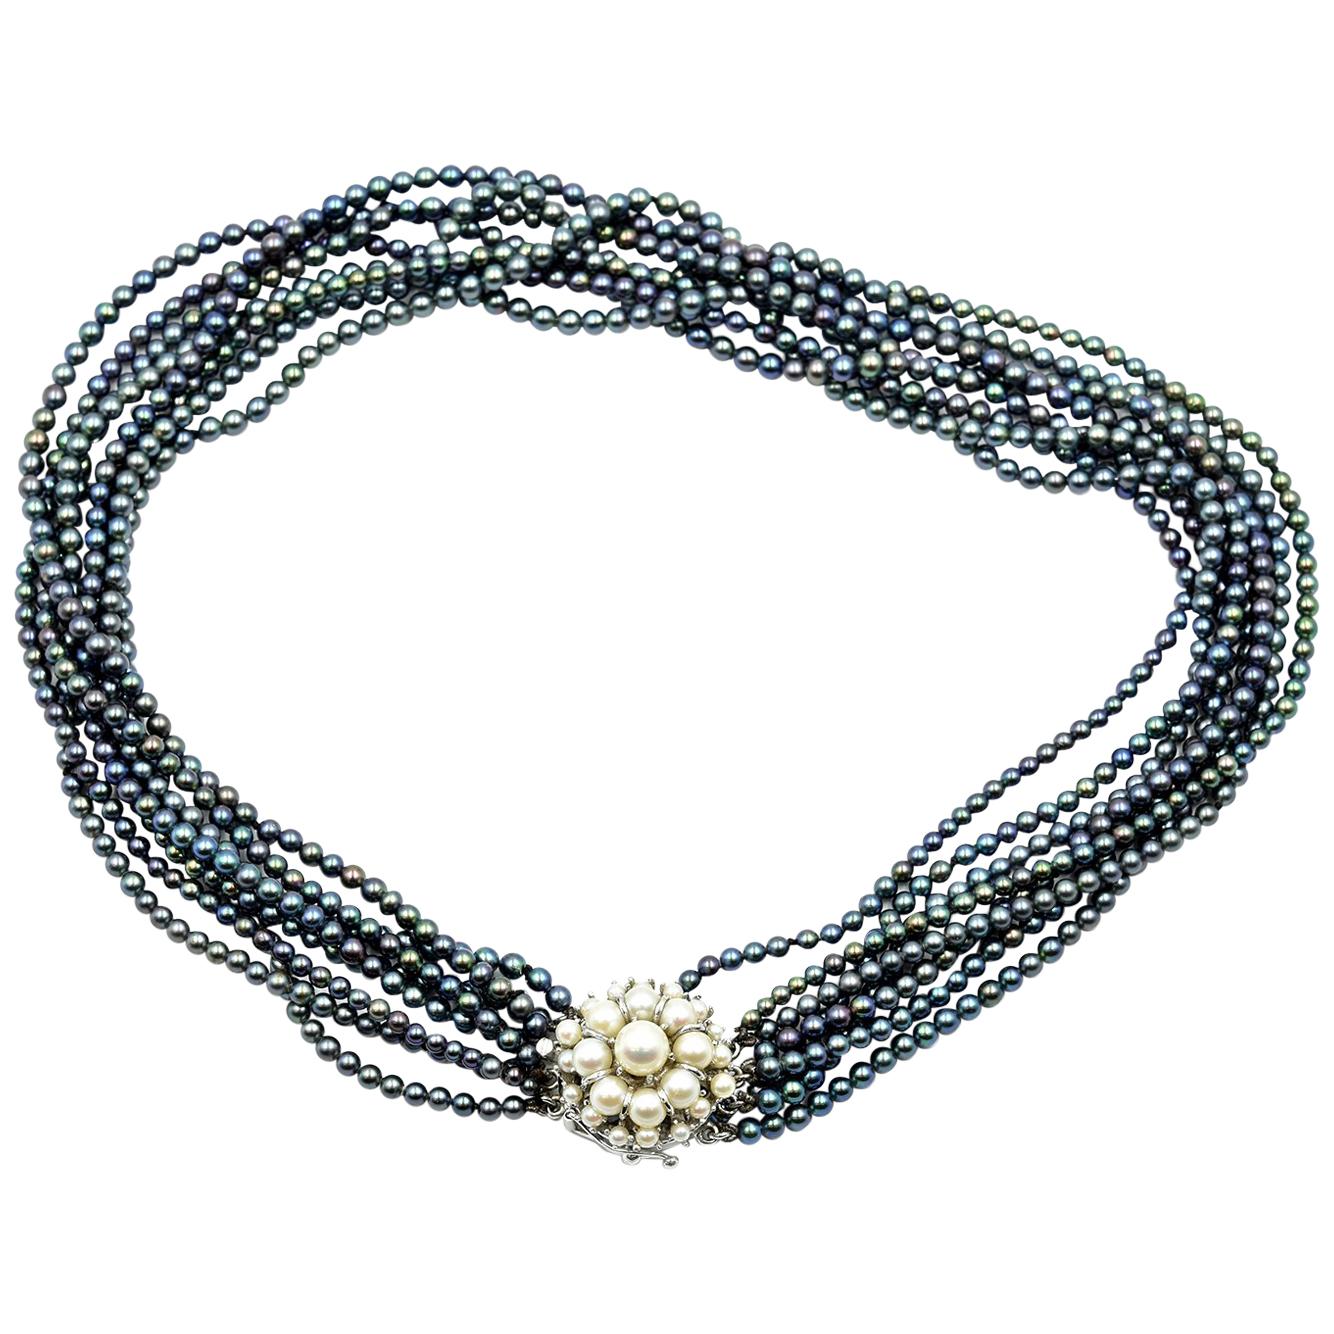 Black Dyed Pearl Strand Necklace with 14 Karat White Gold Pearl Accented Clasp